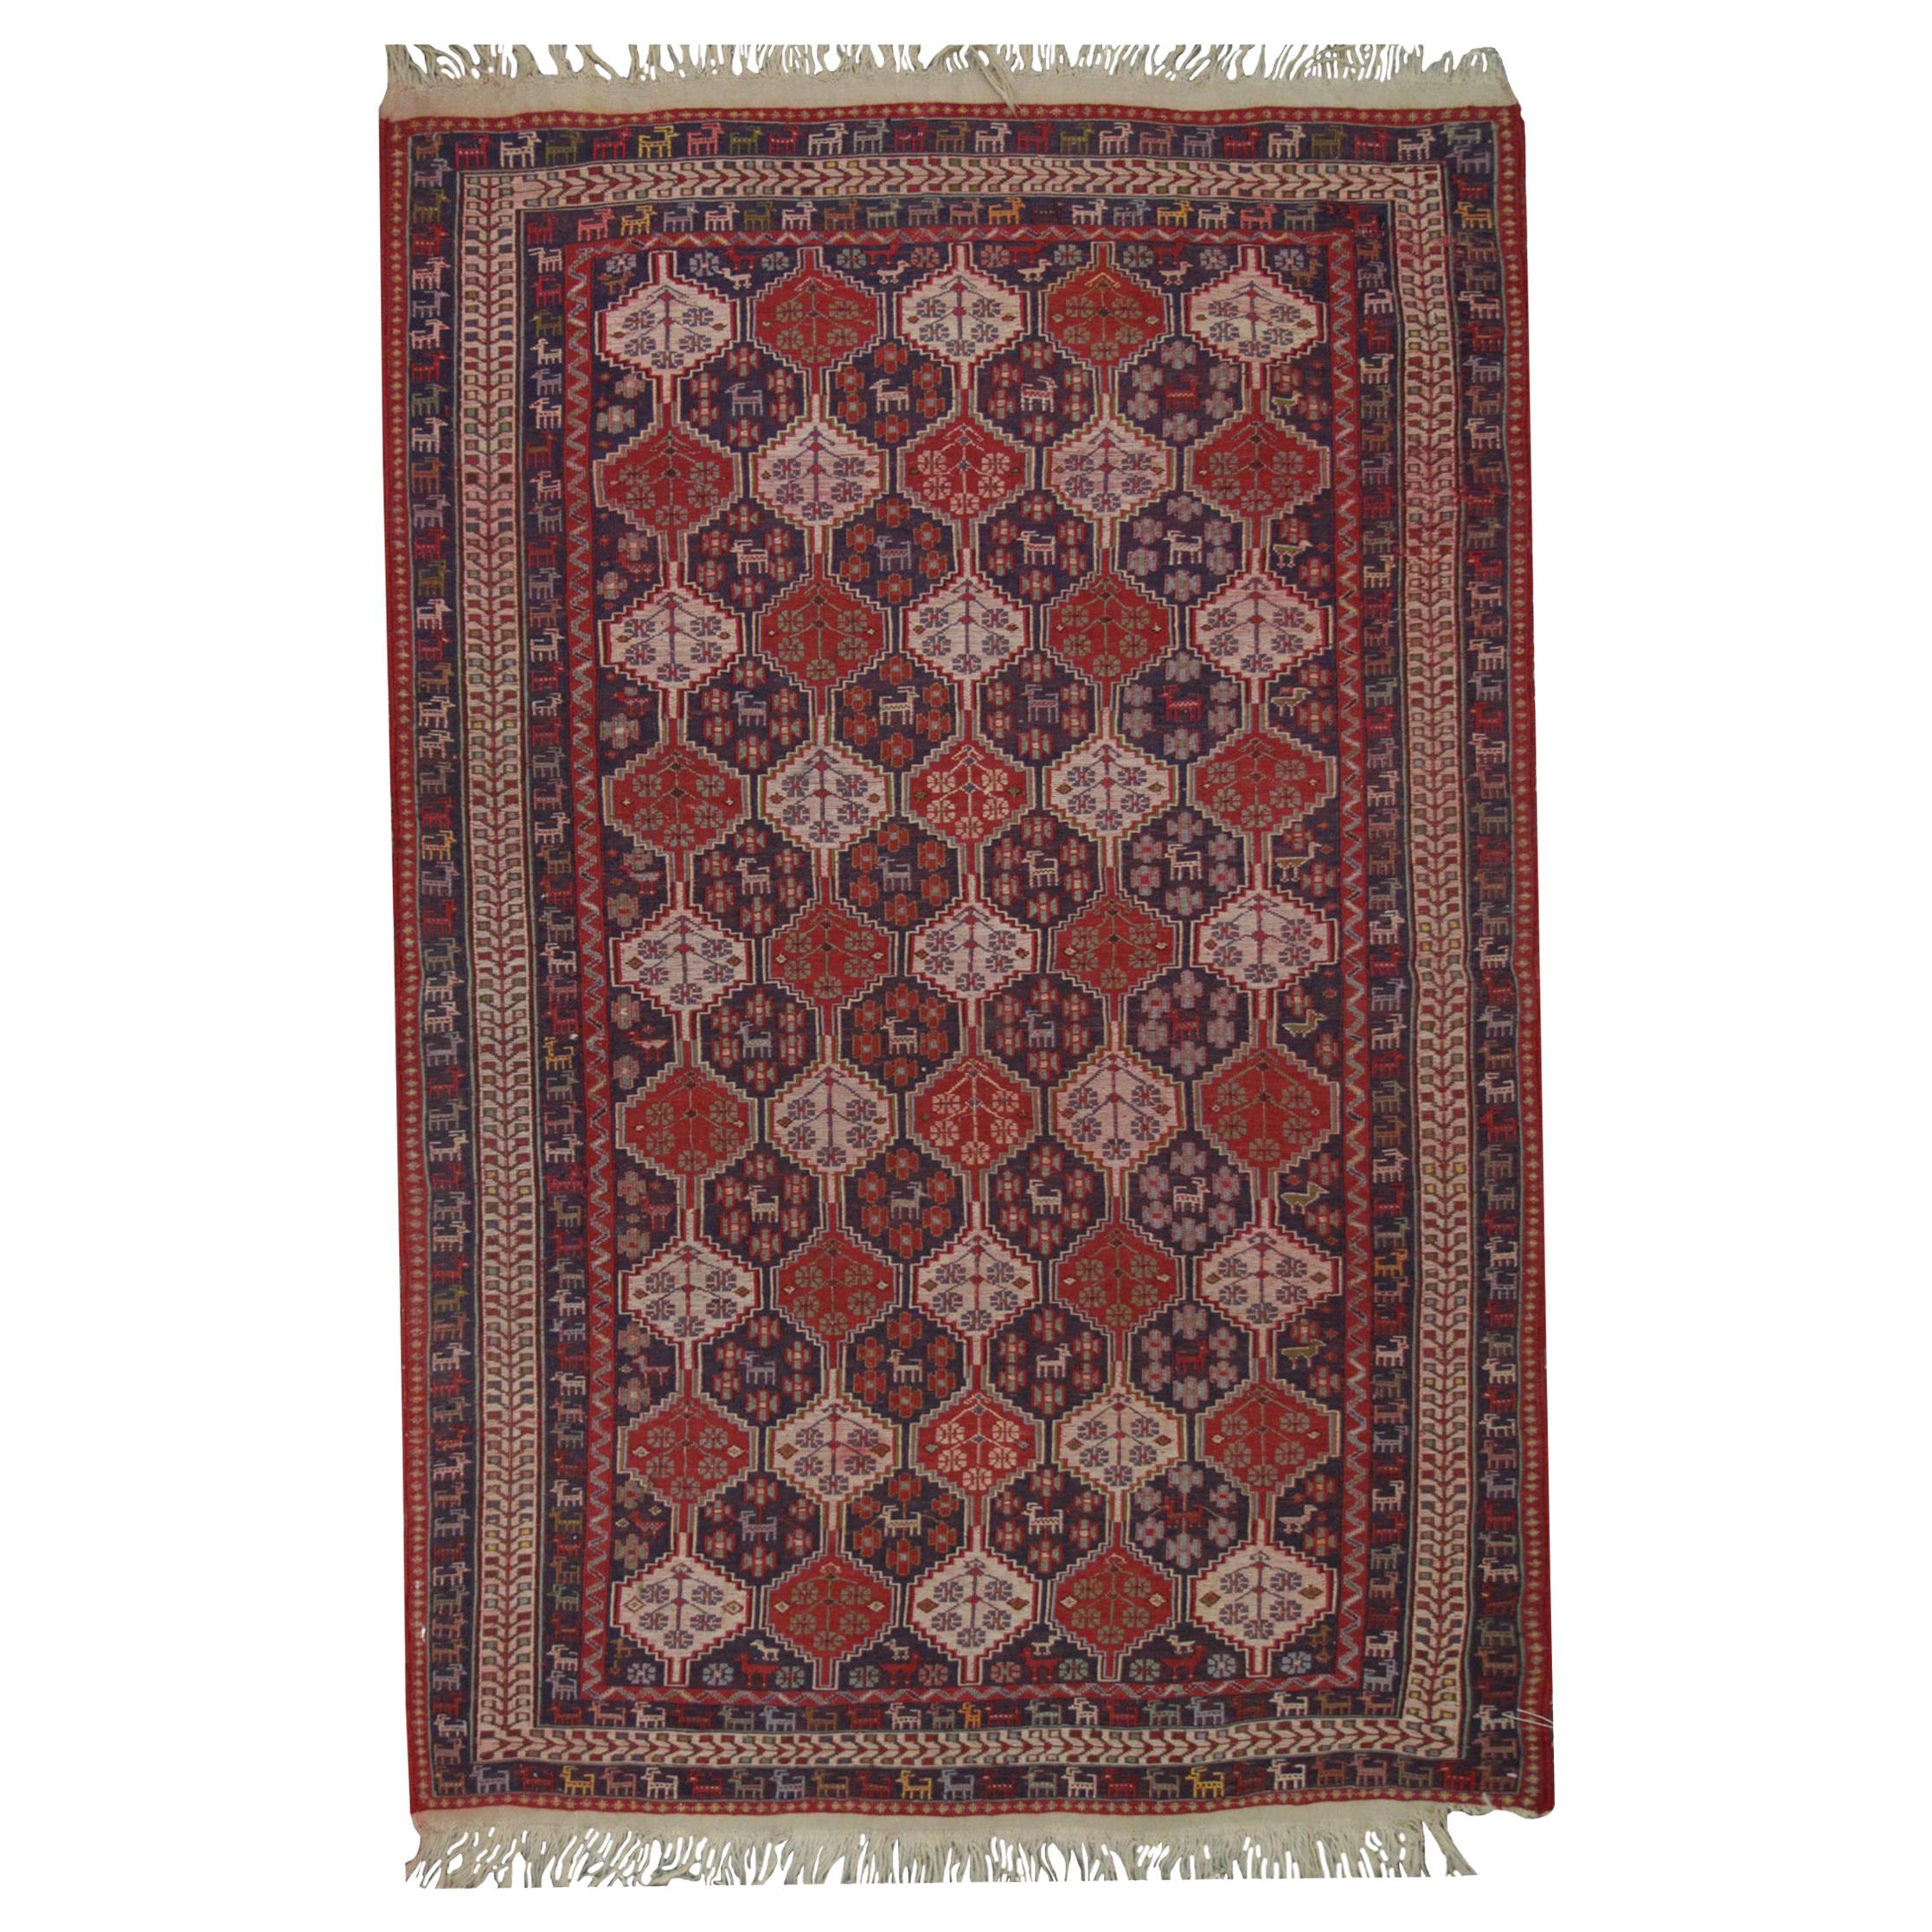 Handwoven Kilims Oriental Area Rug, Traditional Sumakh Kilim Red Wool Carpet For Sale